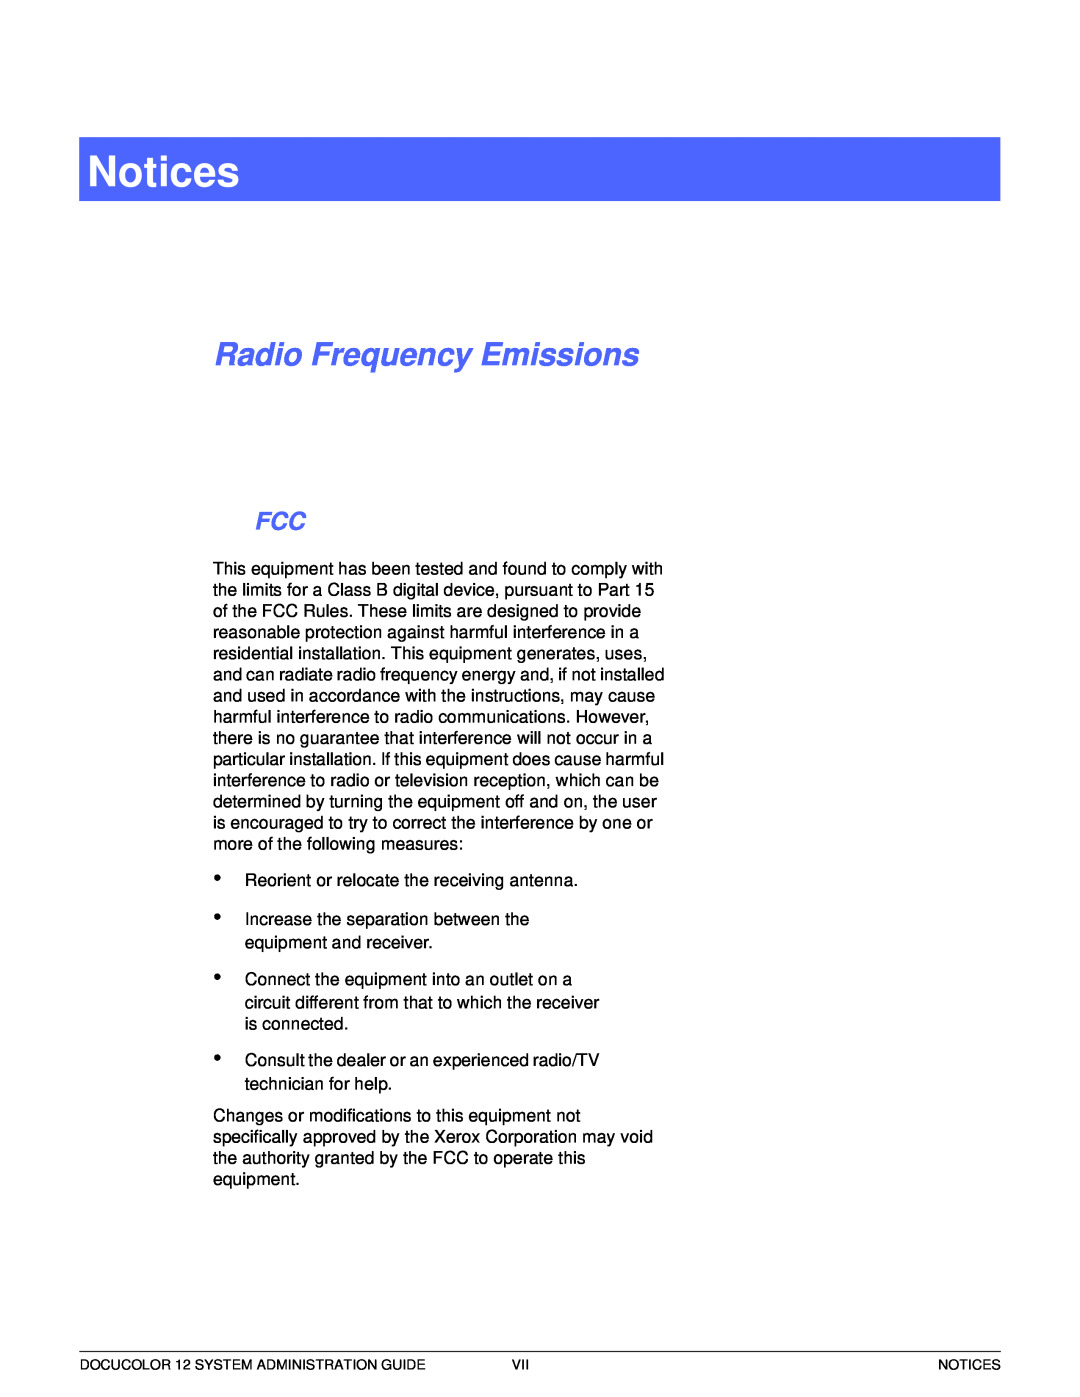 Xerox a2 manual Notices, Radio Frequency Emissions, 1 2 3 4 5 6 7 